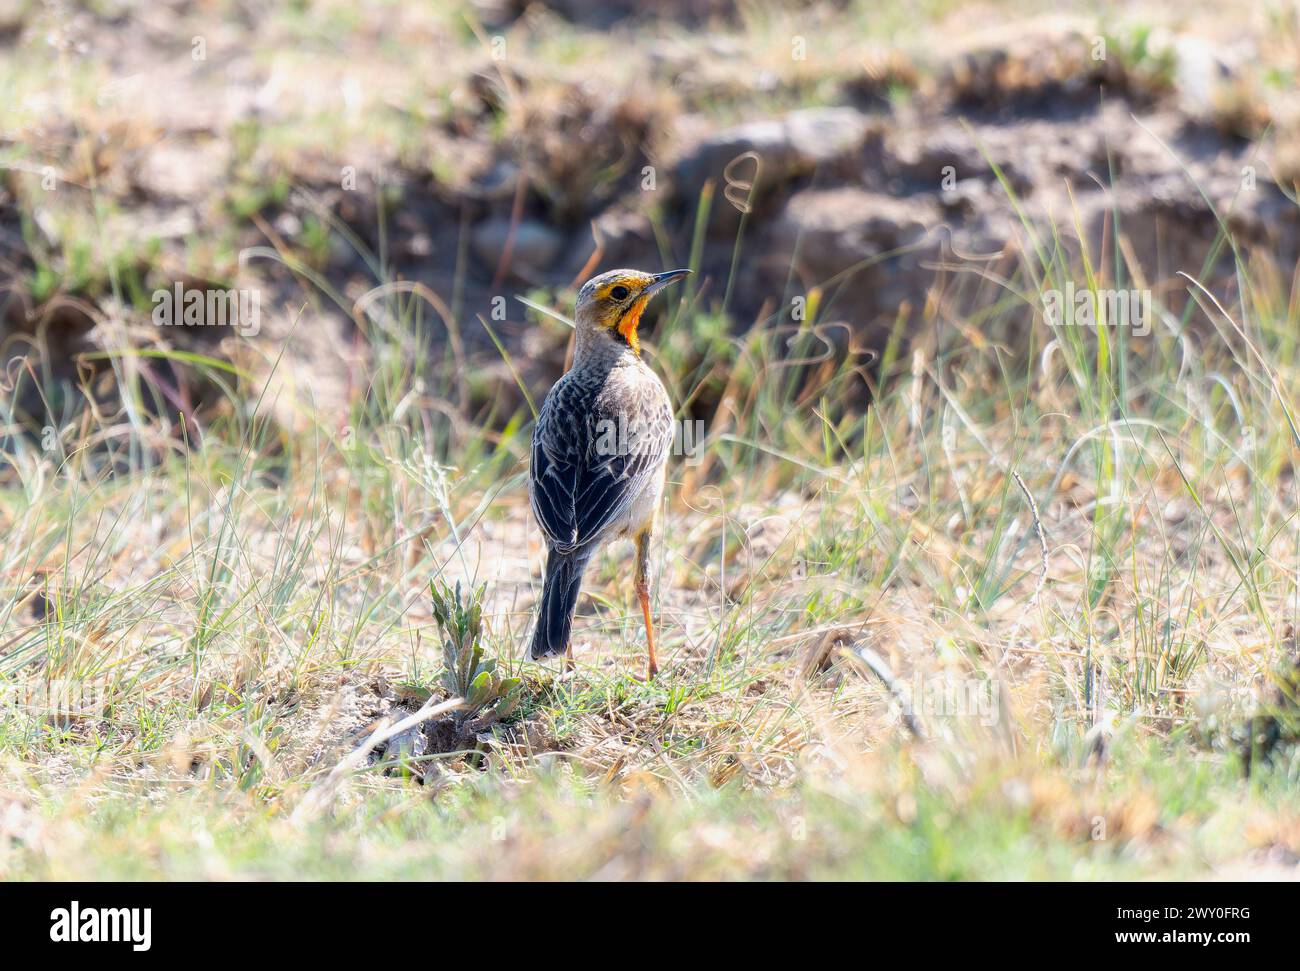 An orange-throated longclaw, Macronyx capensis, perched on the ground in green grass. Stock Photo